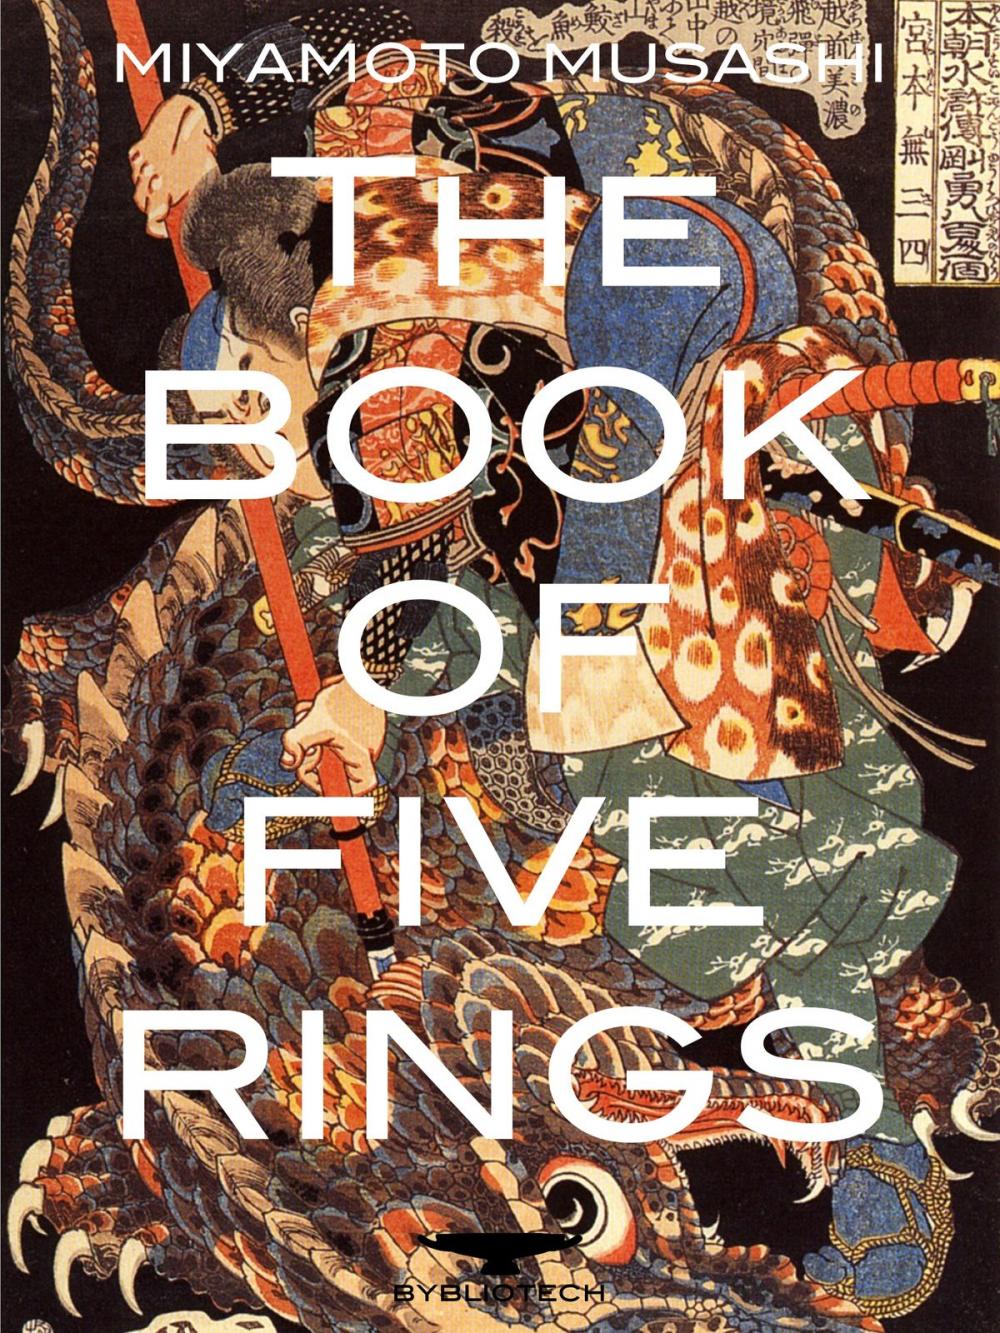 Big bigCover of The Book of Five Rings